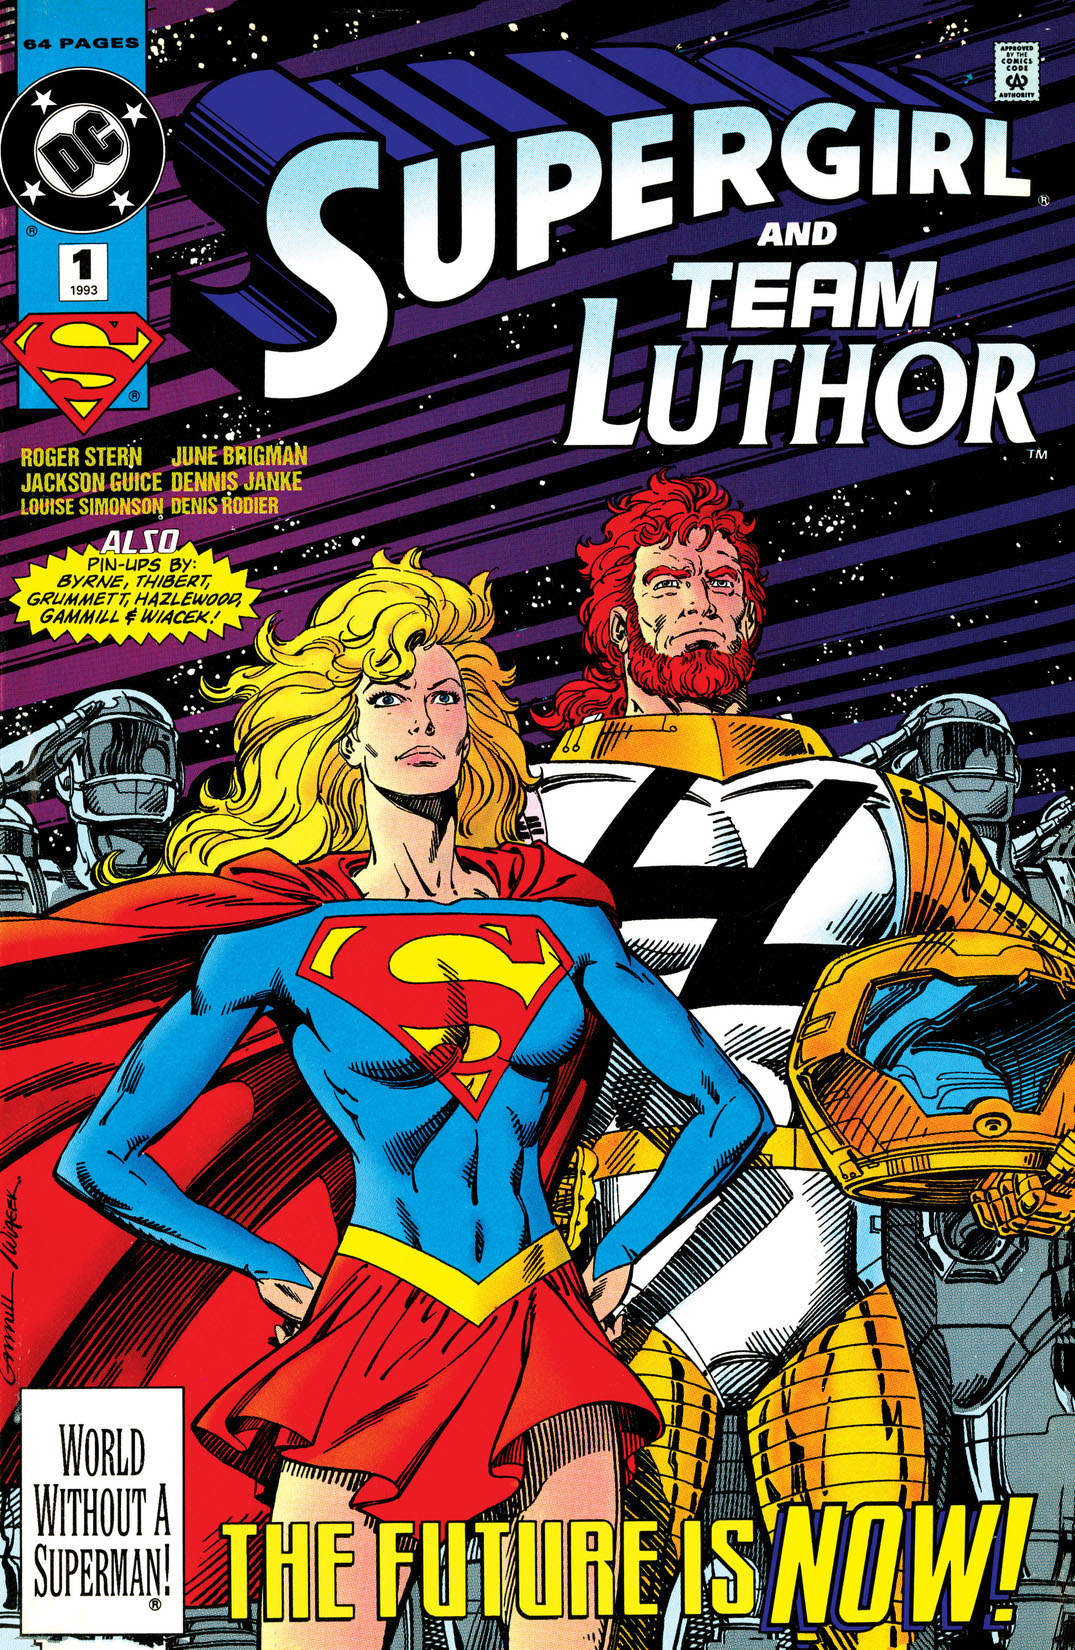 Supergirl/Team Luthor Special (1993-) #1 preview images